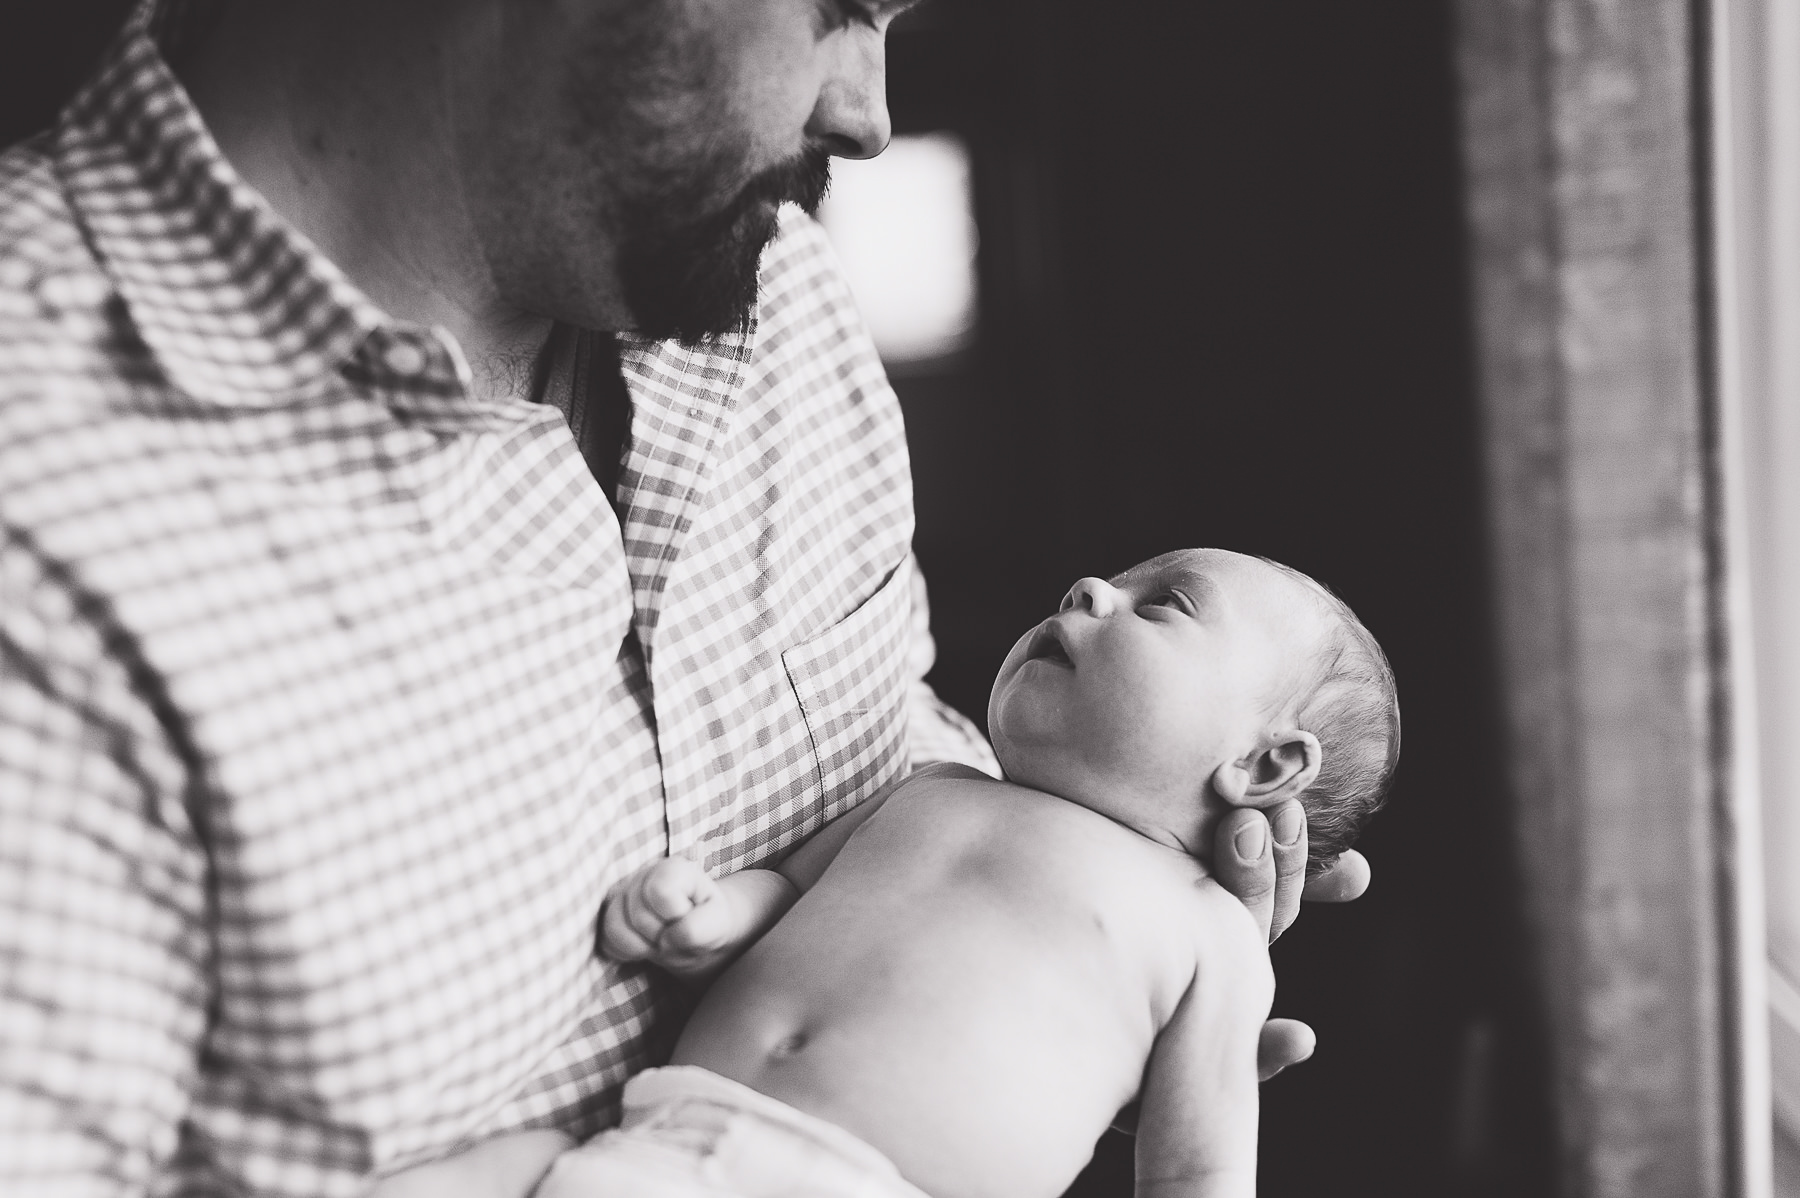 breighton-and-basette-photography-copyrighted-image-blog-croix-newborn-049.jpg